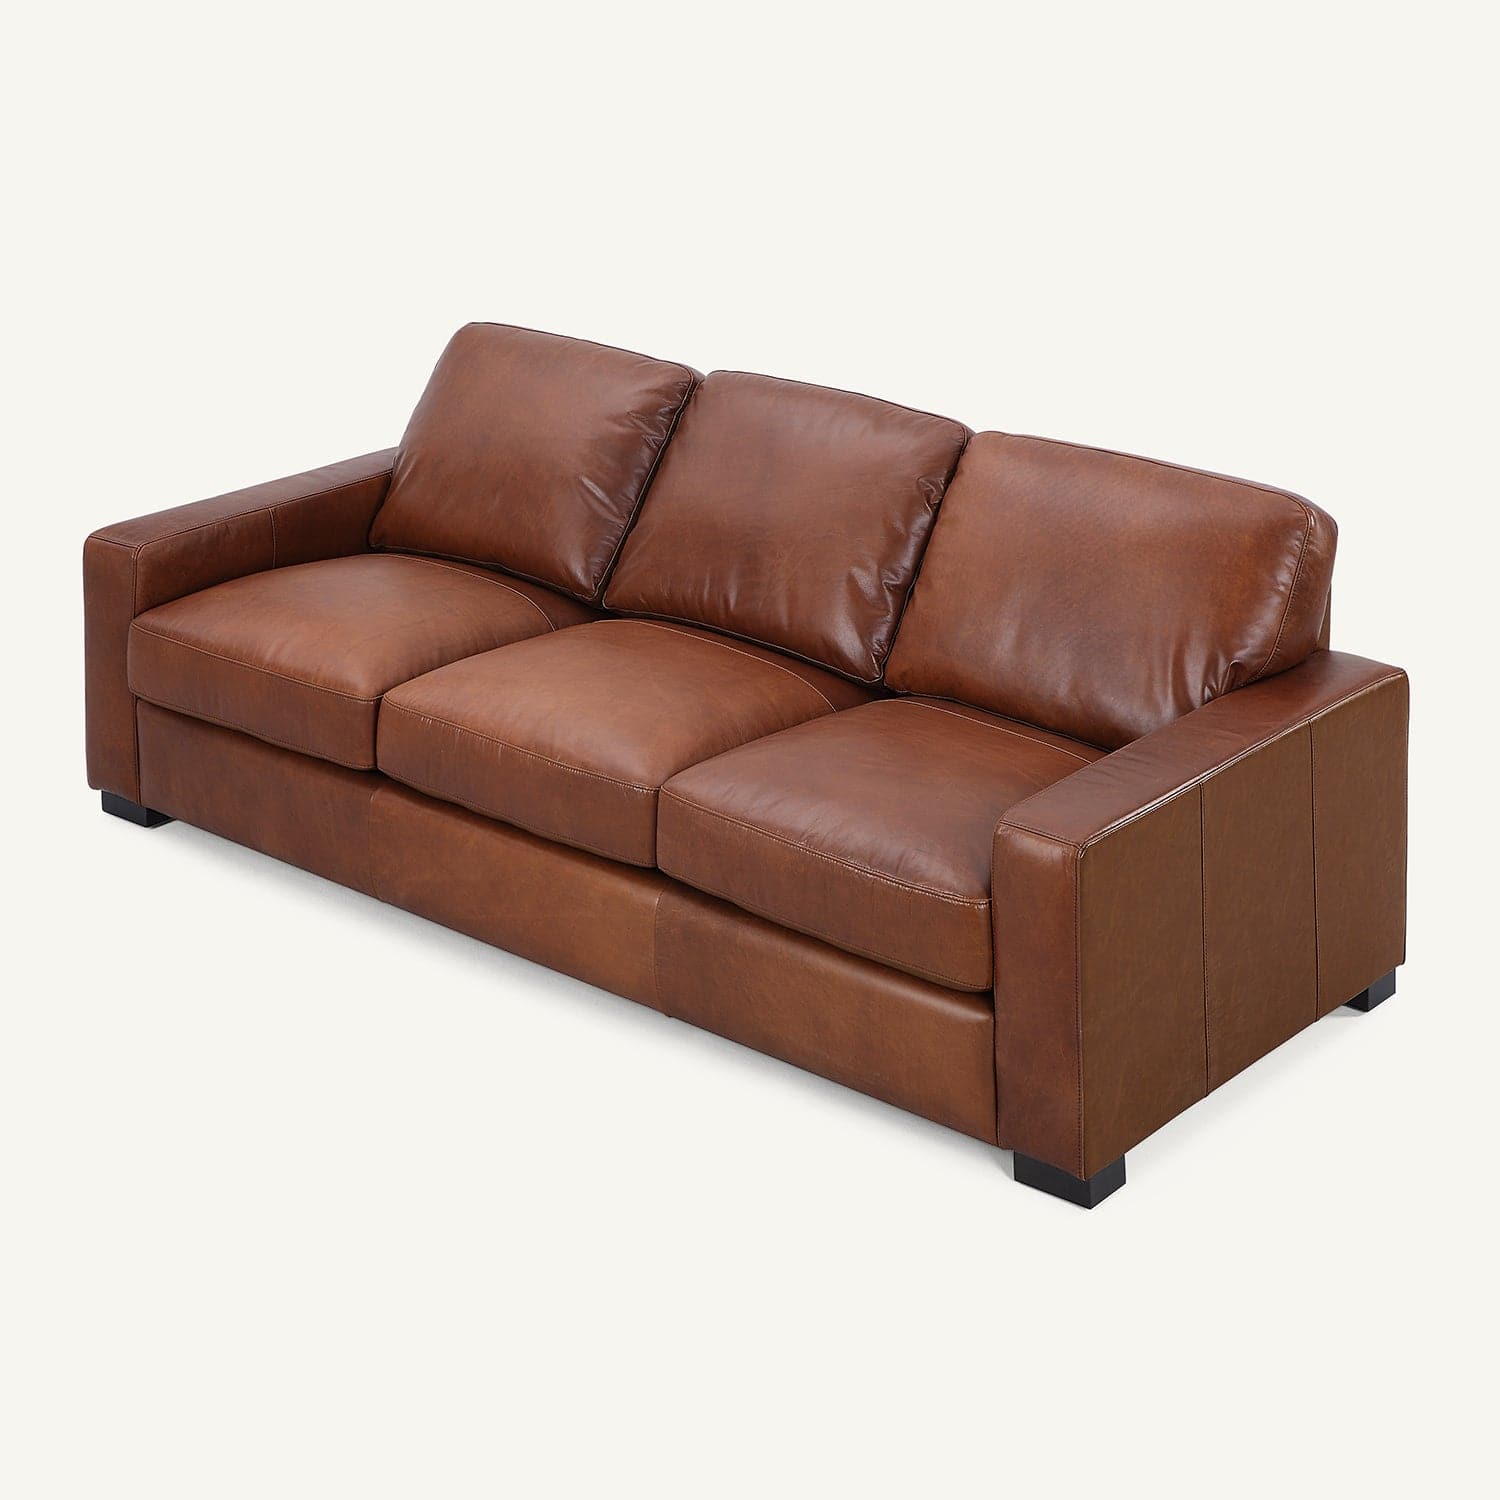 Randall Chestnut Brown Oil Wax Leather 2 Pieces 1+3 Sofa Set